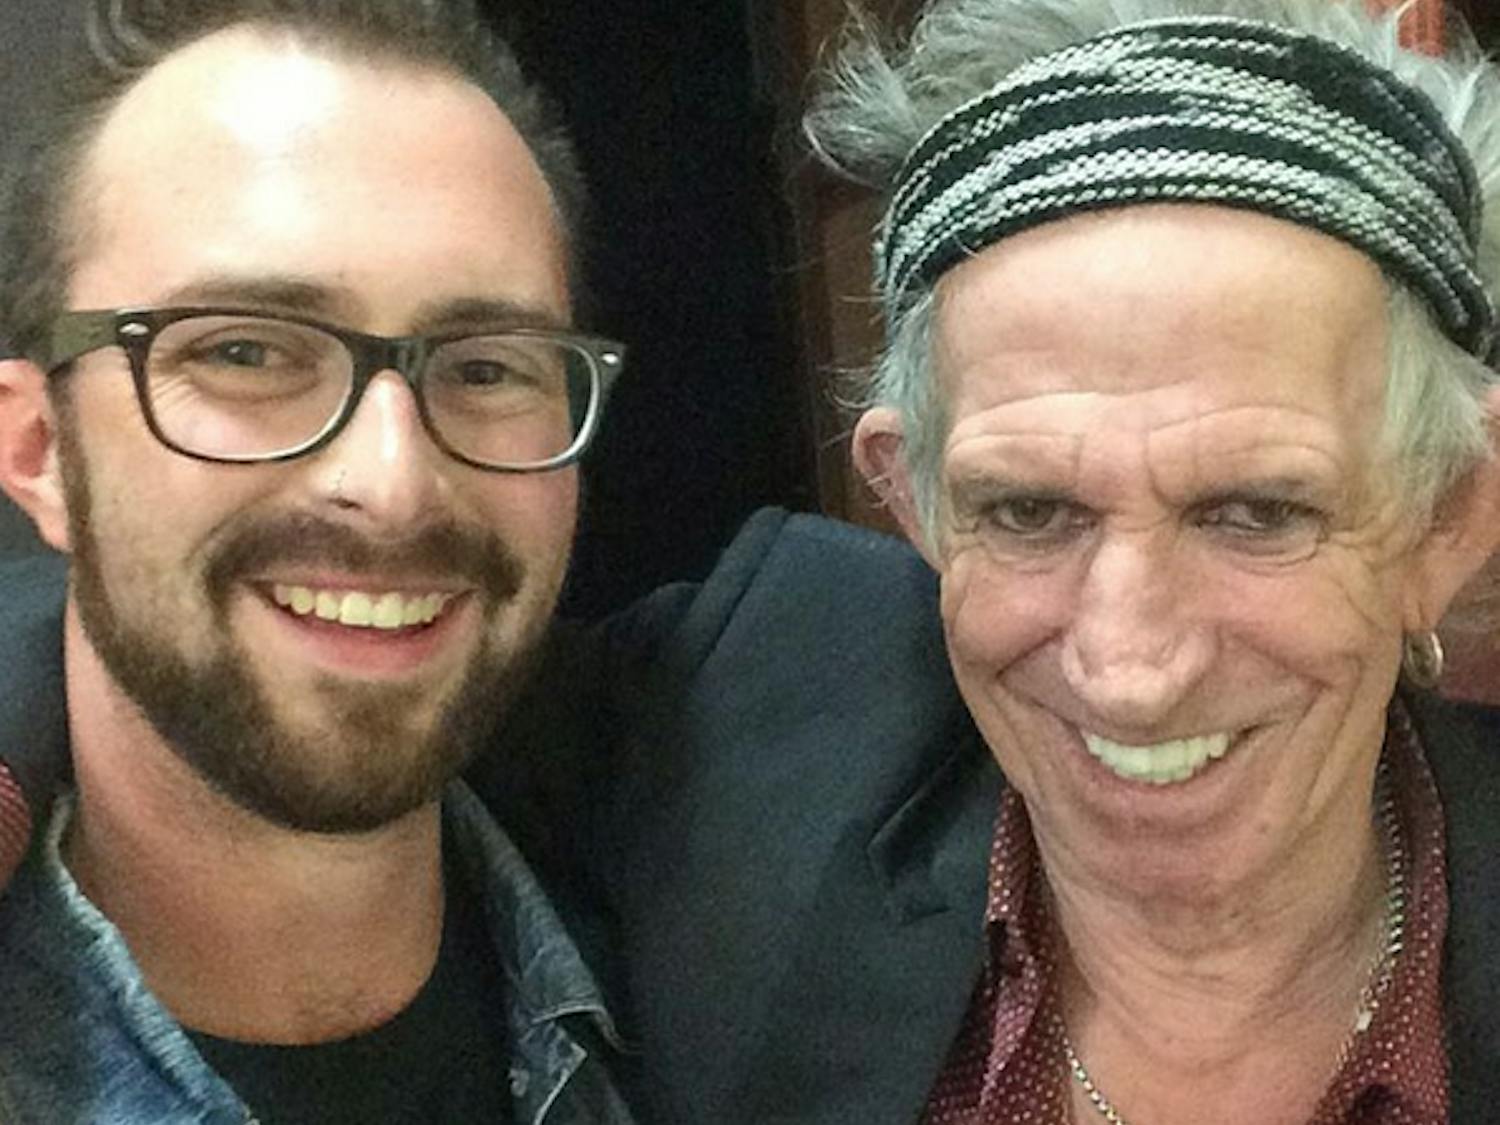 Josh Cannon and Keith Richards Selfie